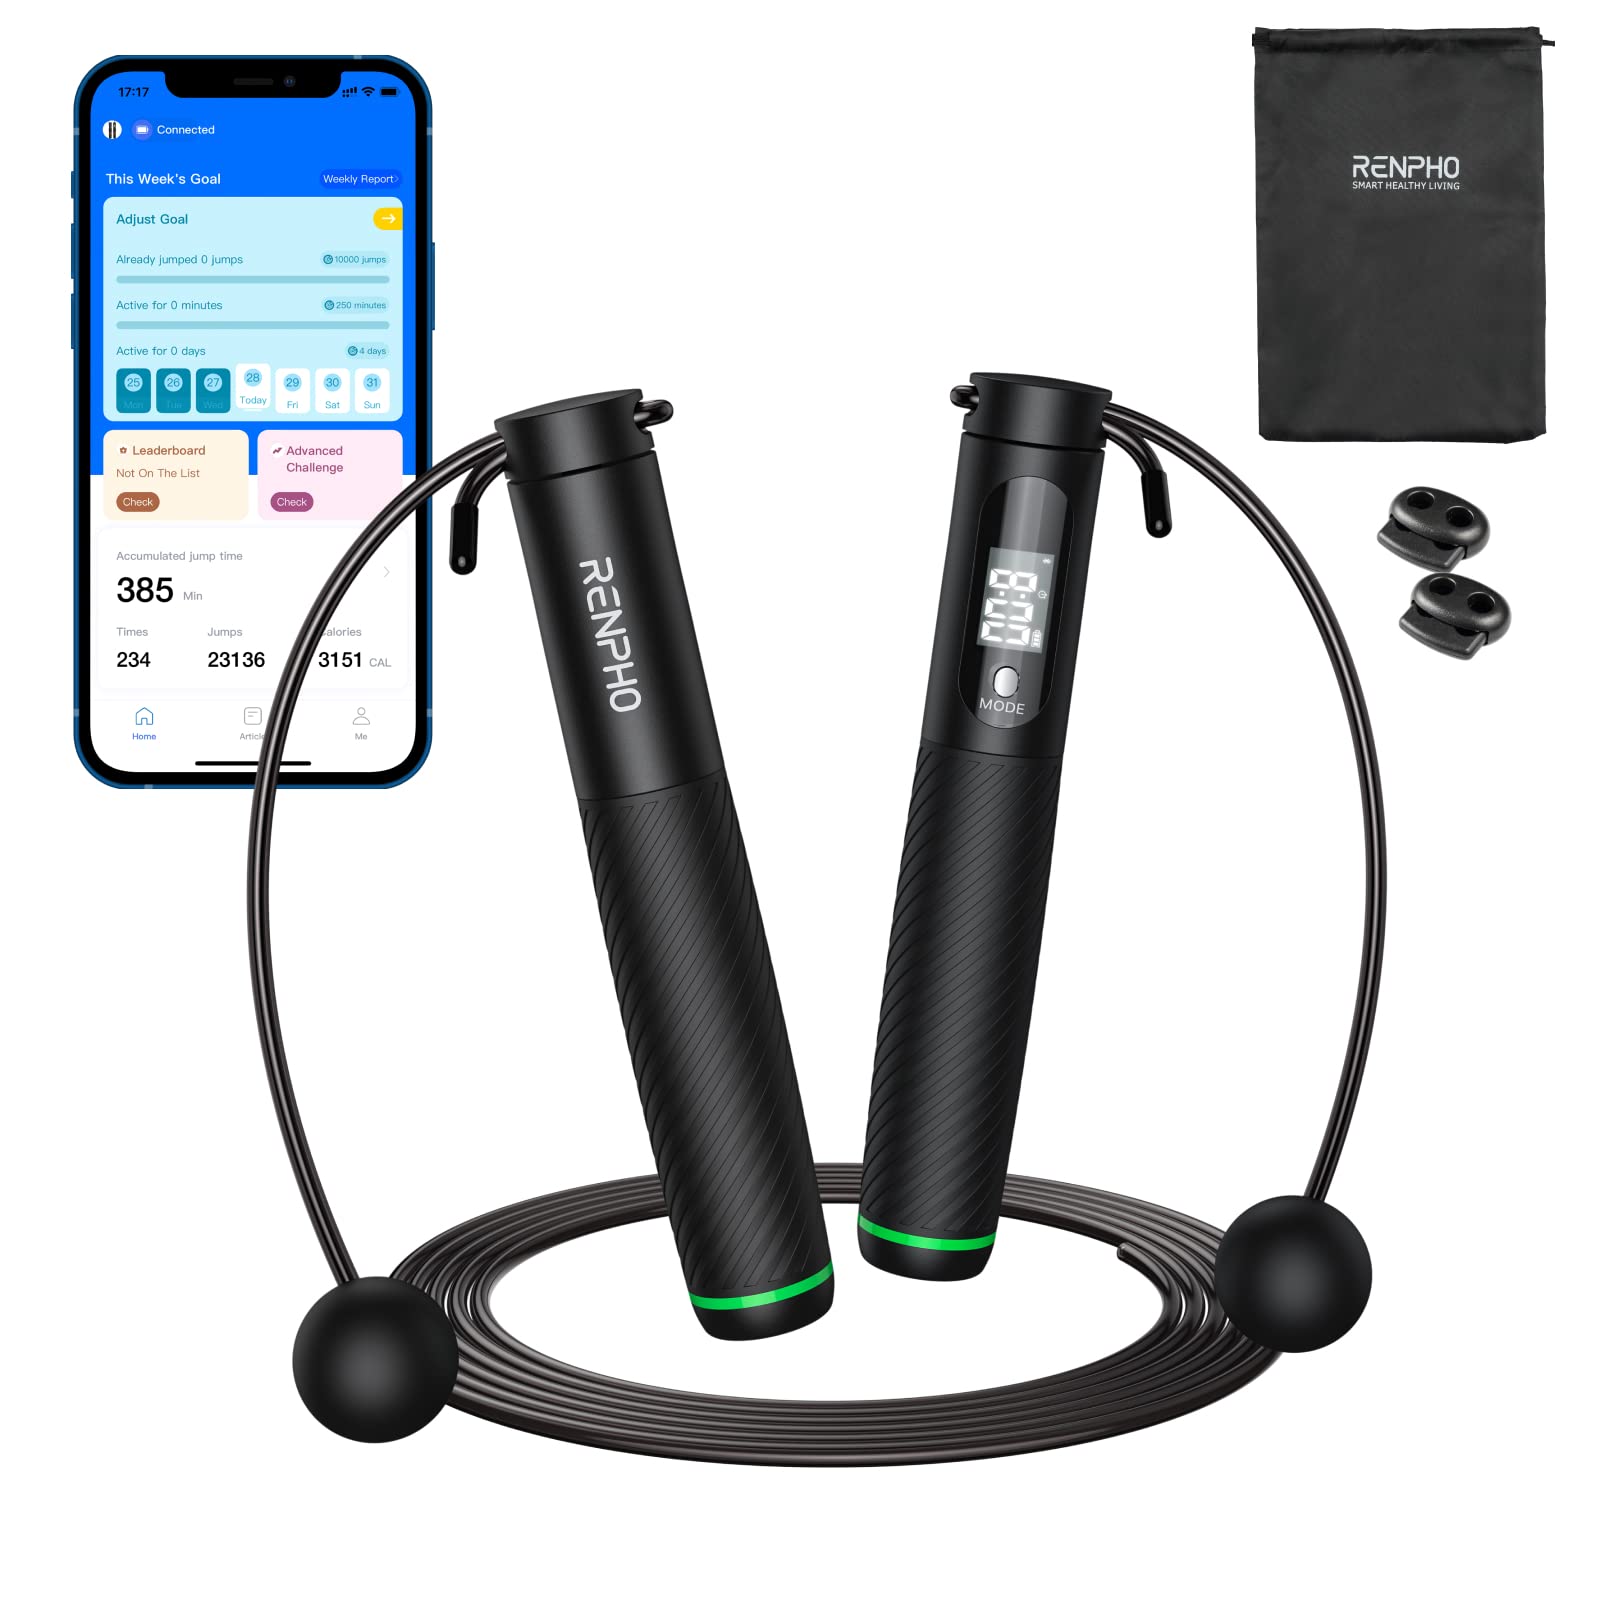 RENPHO Smart Skipping Rope with Counter, Adjustable Cordless Jump Ropes, APP Data Analysis, Speed Skip Rope for Fitness, Workout Equipment for Women Men Kids, Crossfit, Gym, MMA (Black1)